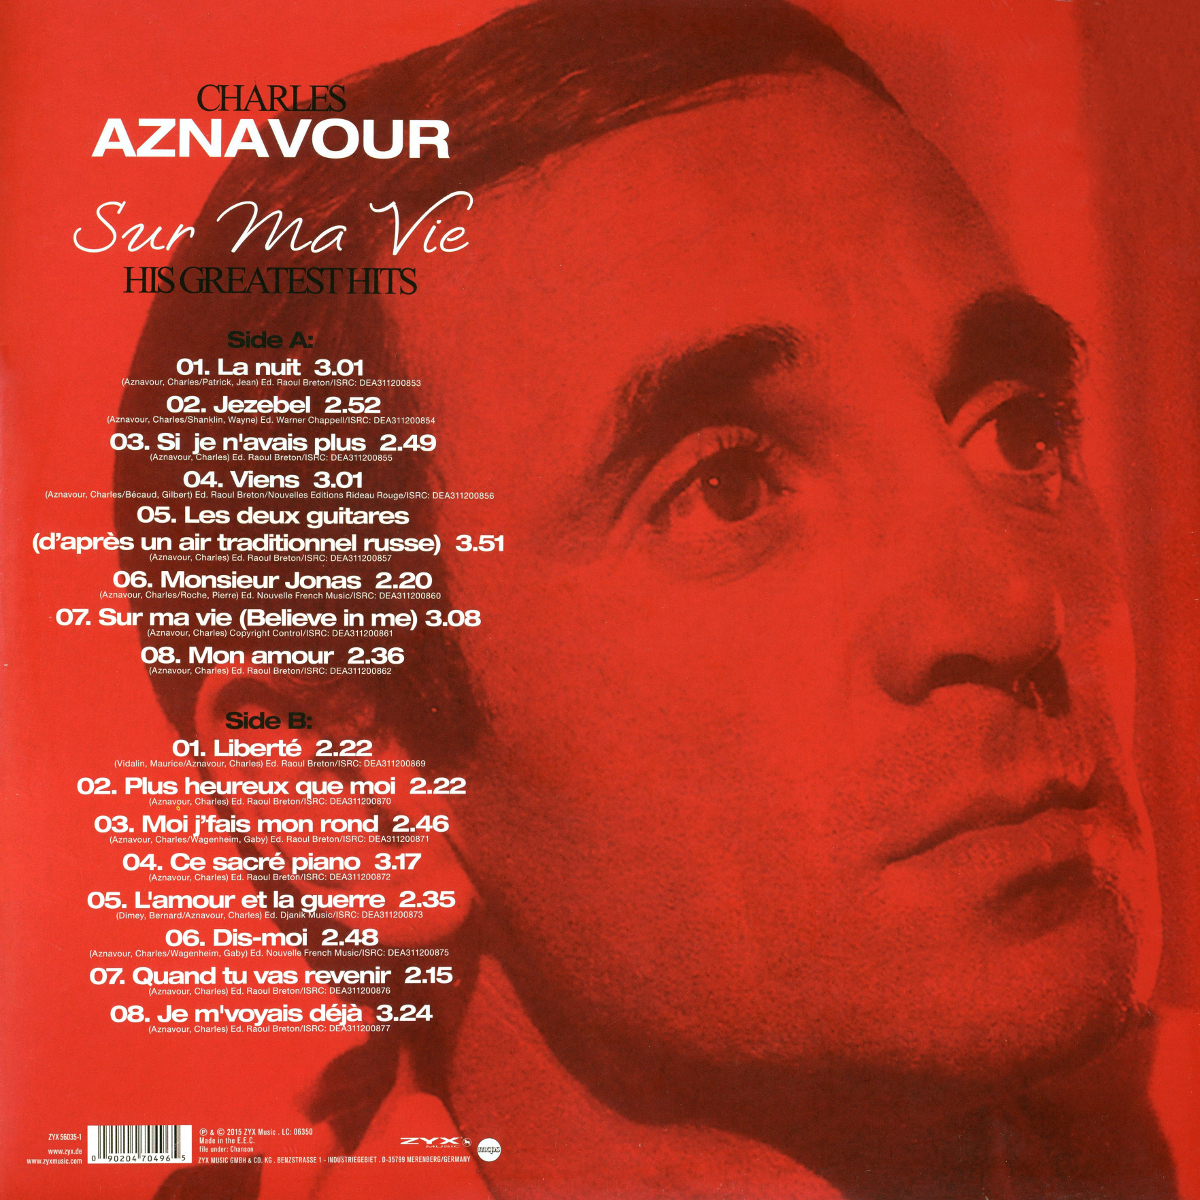 Charles Aznavour - Sur Ma Vie His Greatest Hits (ZYX 56035-1)